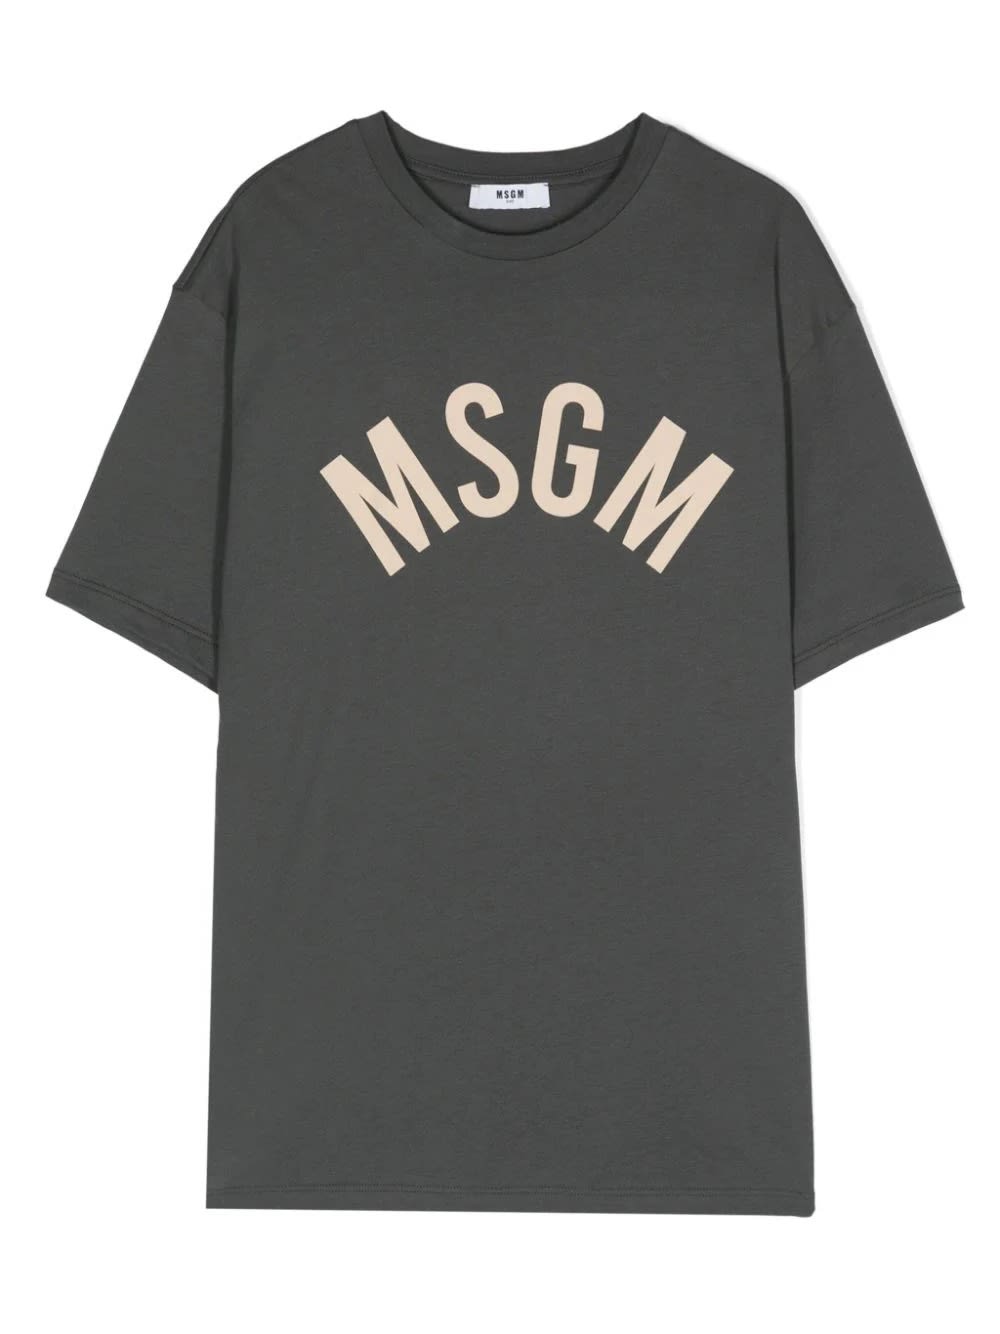 Msgm Kids' Grey T-shirt With Arched Logo